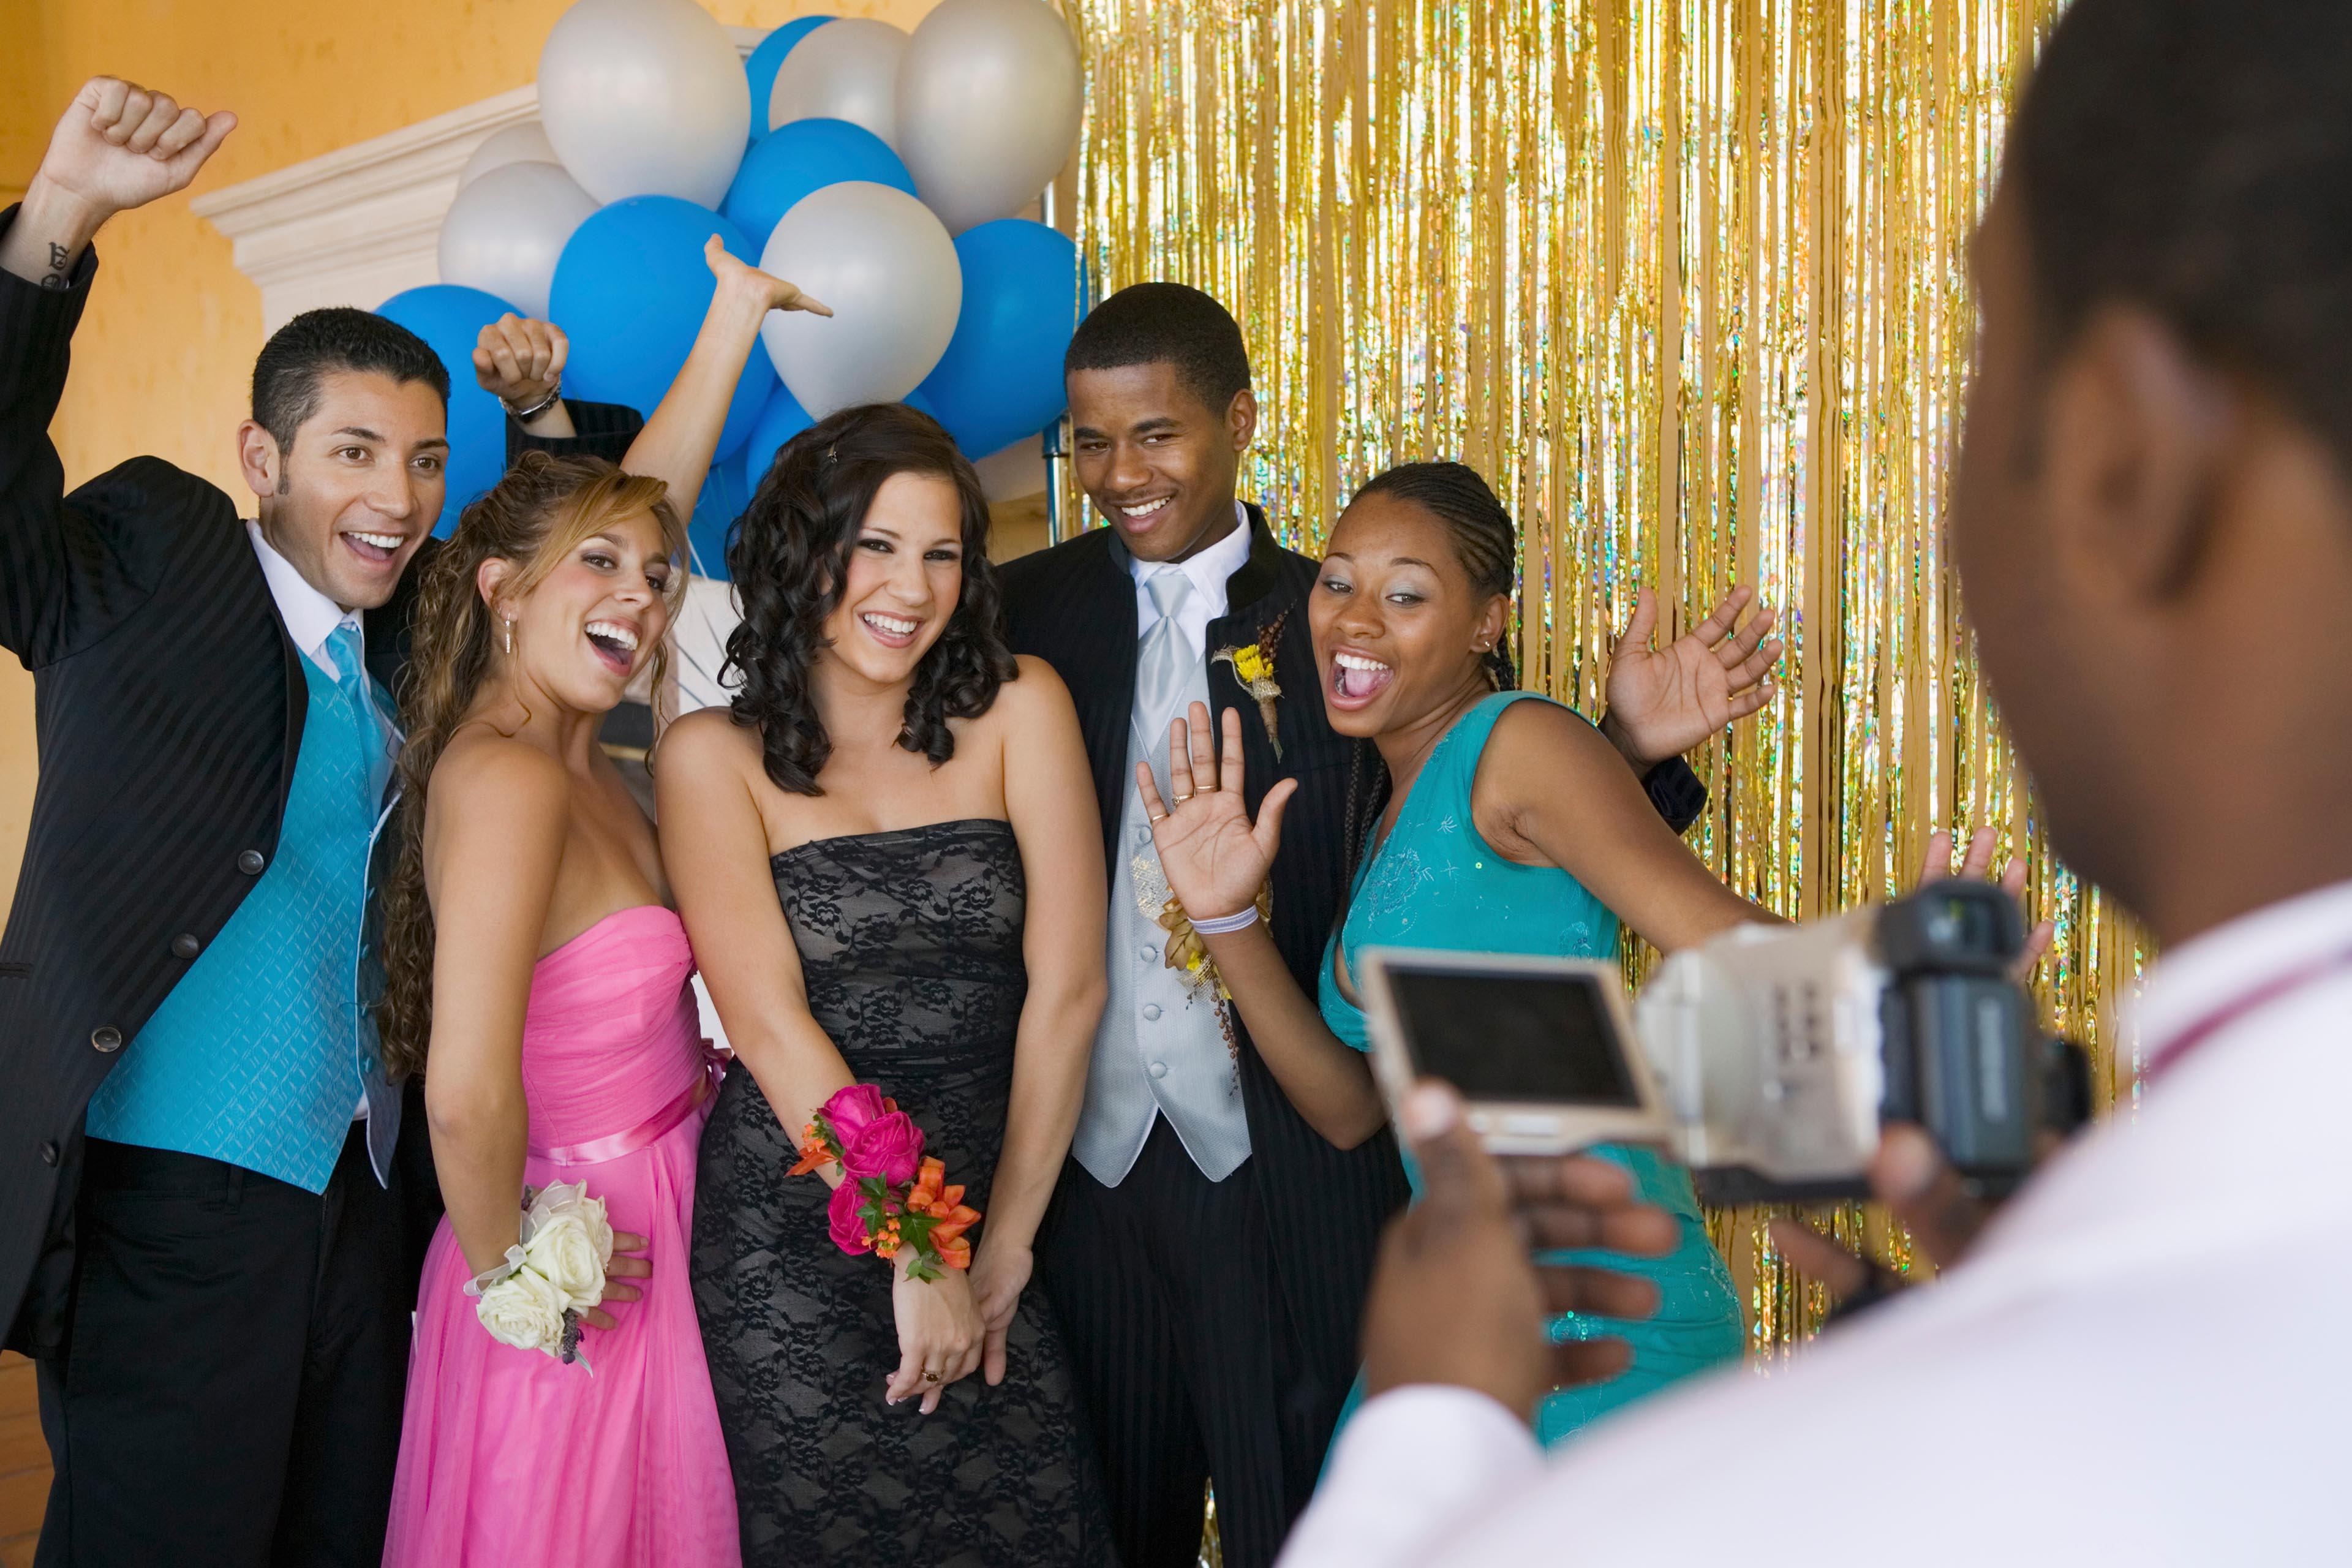 A Night to Remember: How You Can Ensure Your Child’s Safety for High School Dance Nights